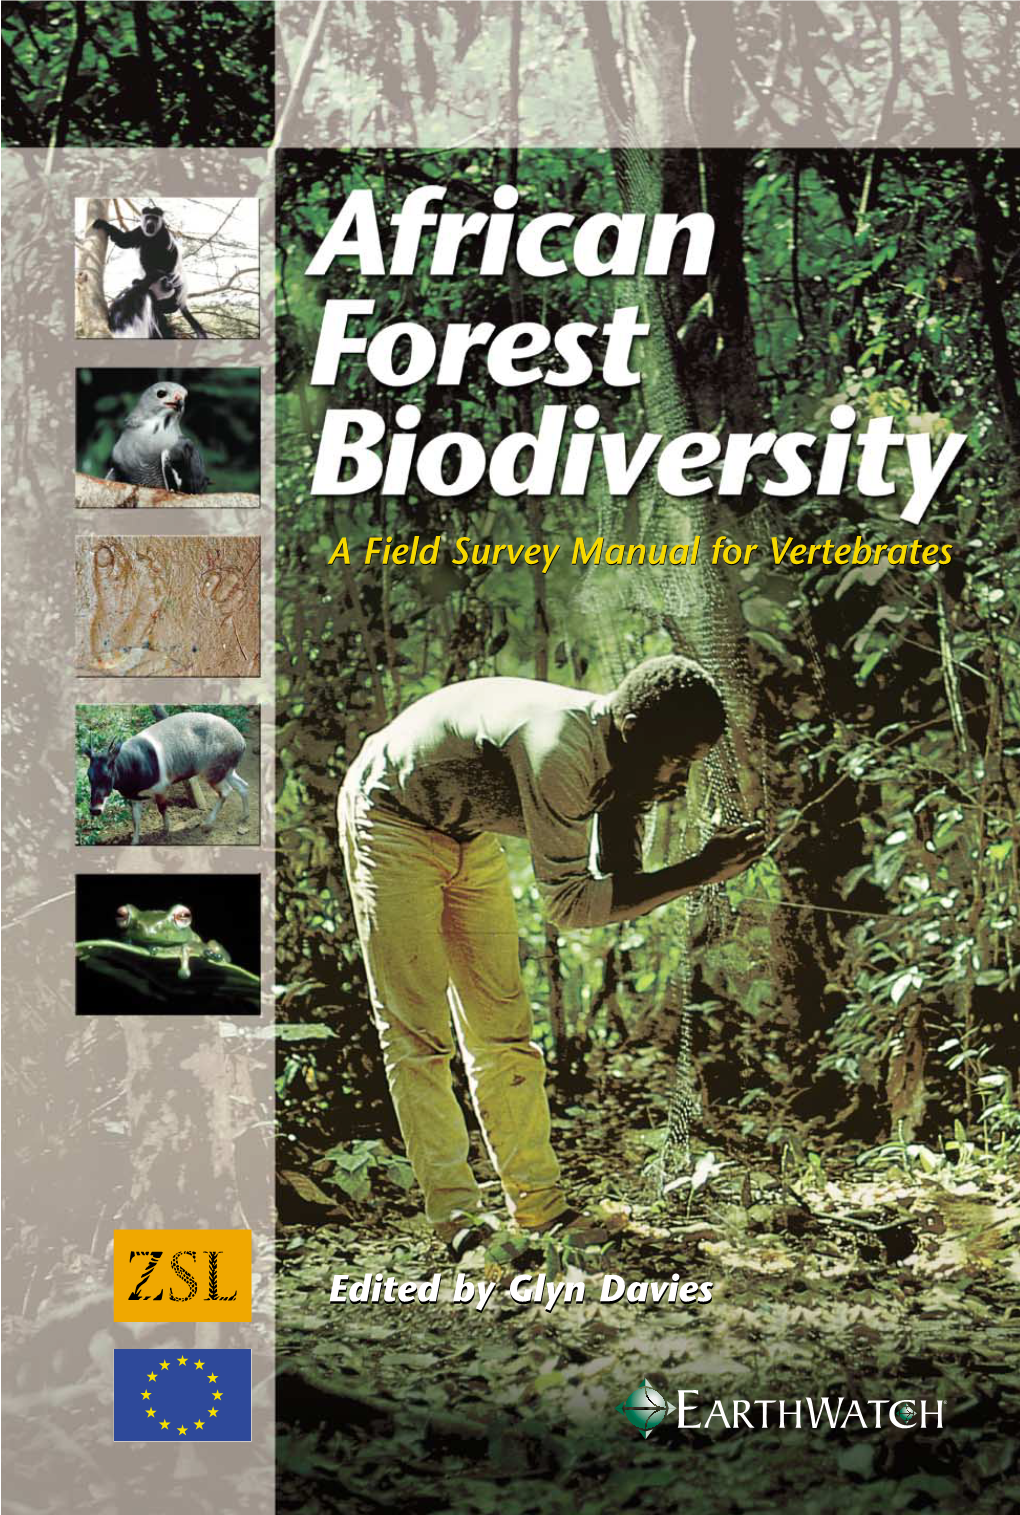 African Forest Biodiversity: a Field Survey Manual for Vertebrates